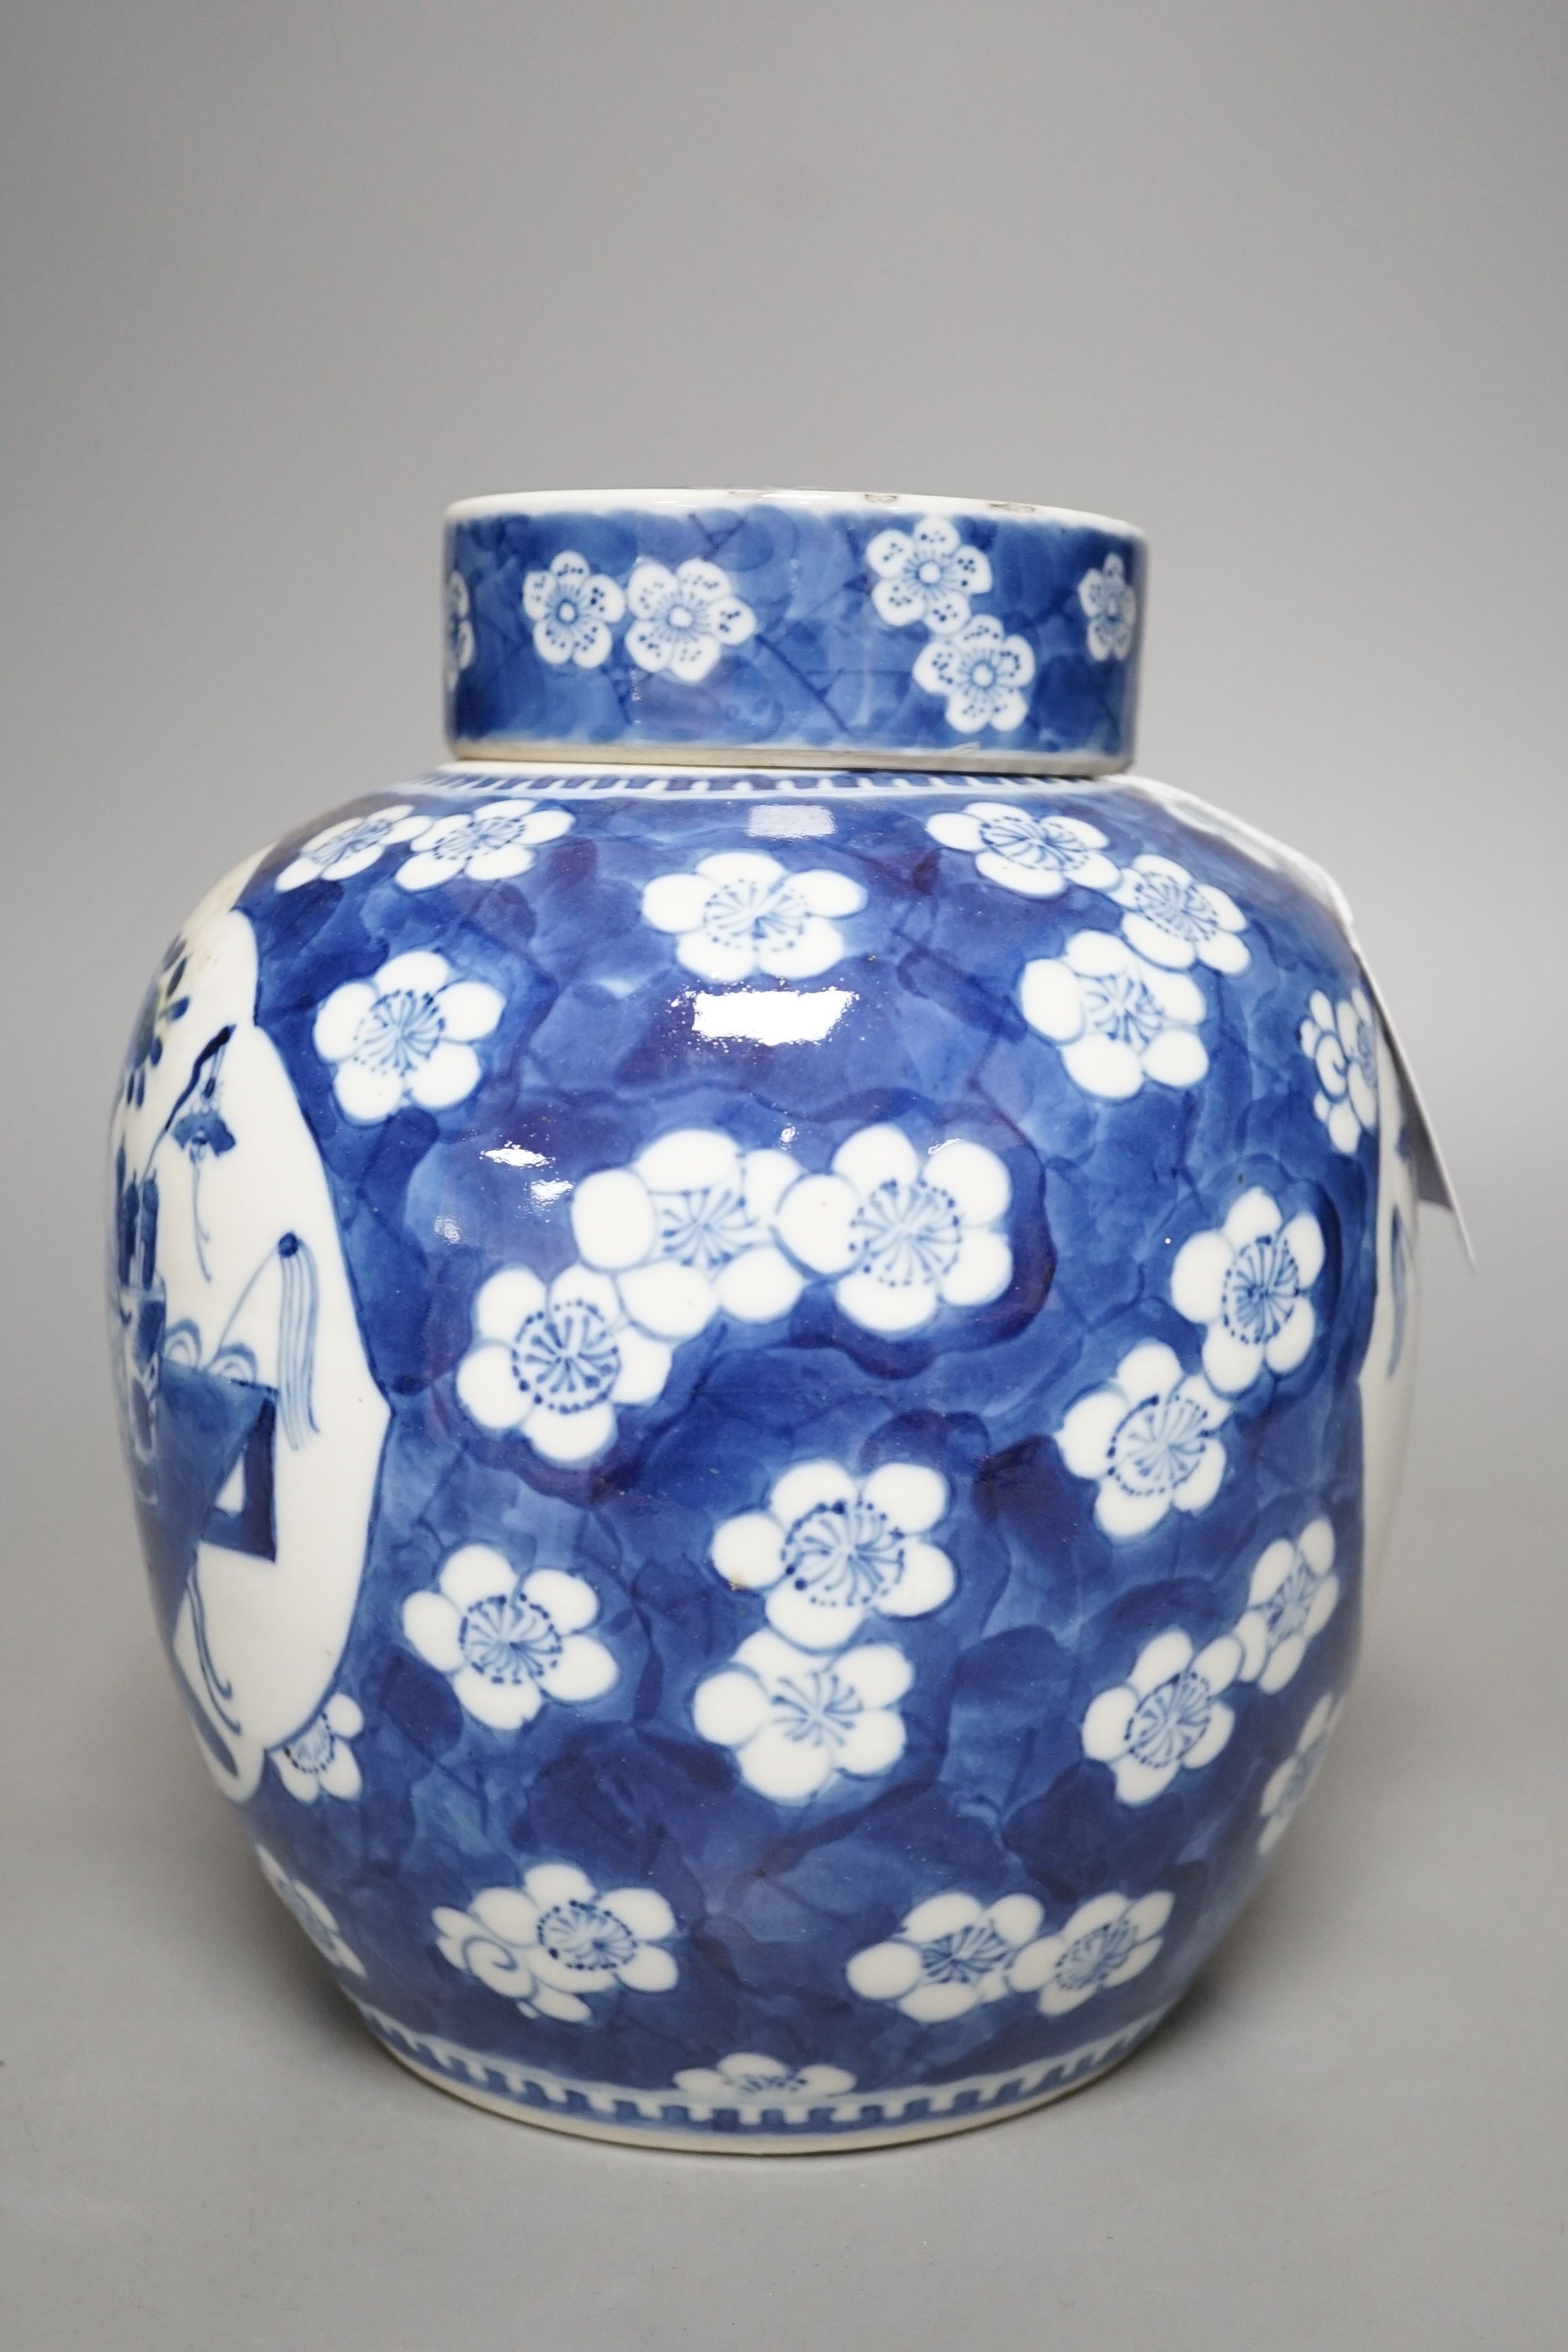 A 19th century Chinese blue and white ginger jar and cover - 20.5cm tall